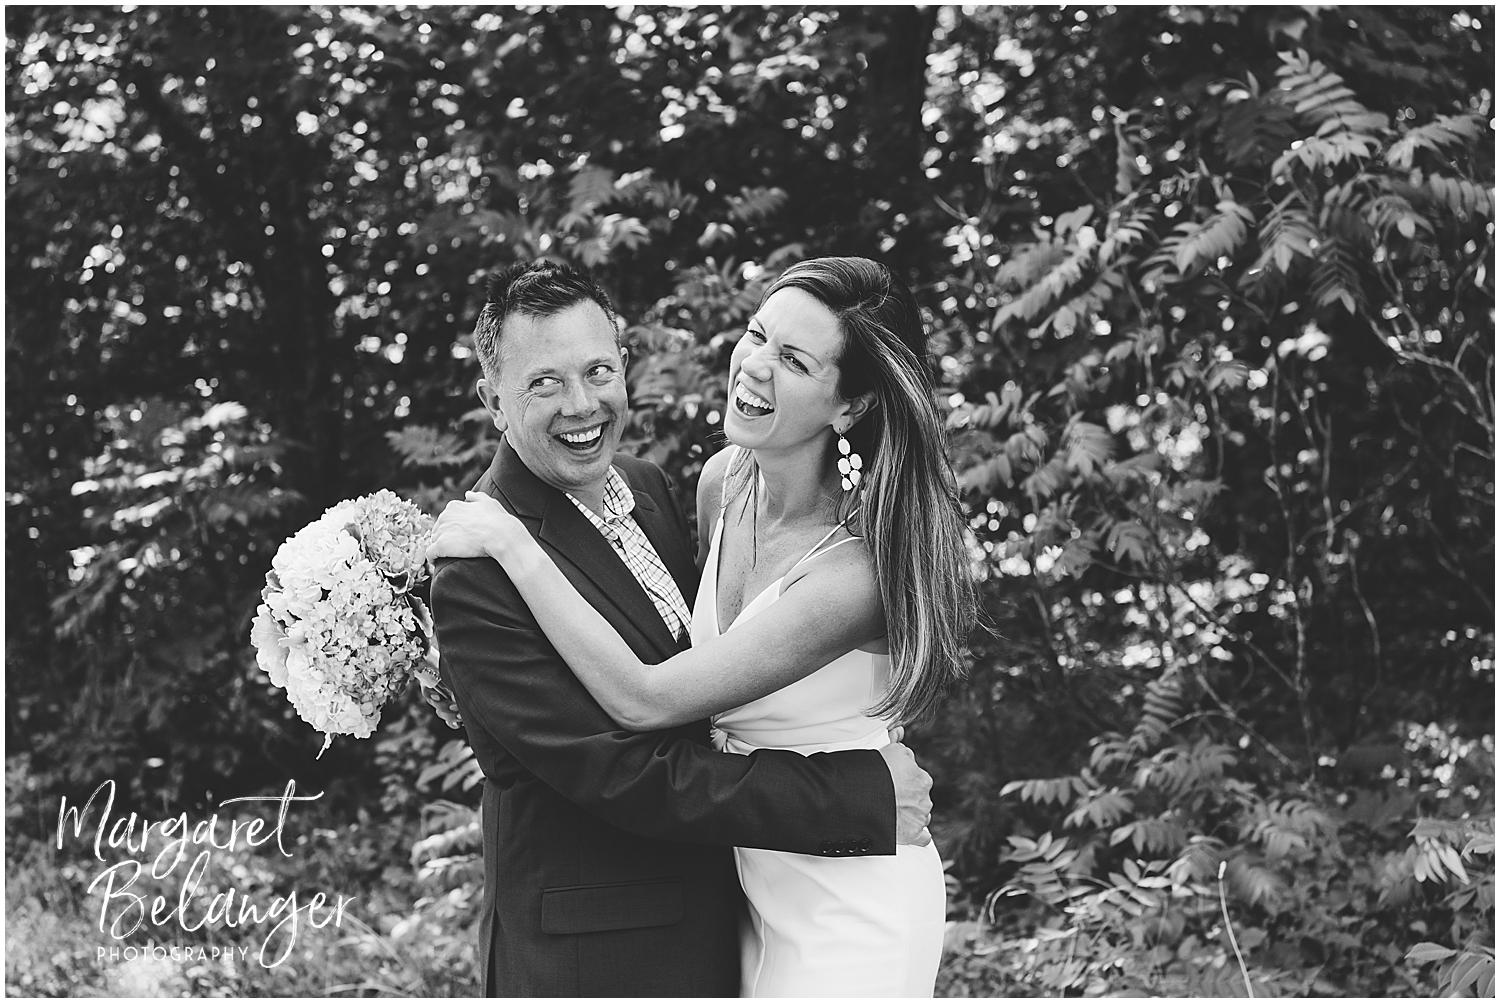 A happy wedding couple laughing together while posing for a photo, the bride holding a bouquet of flowers.